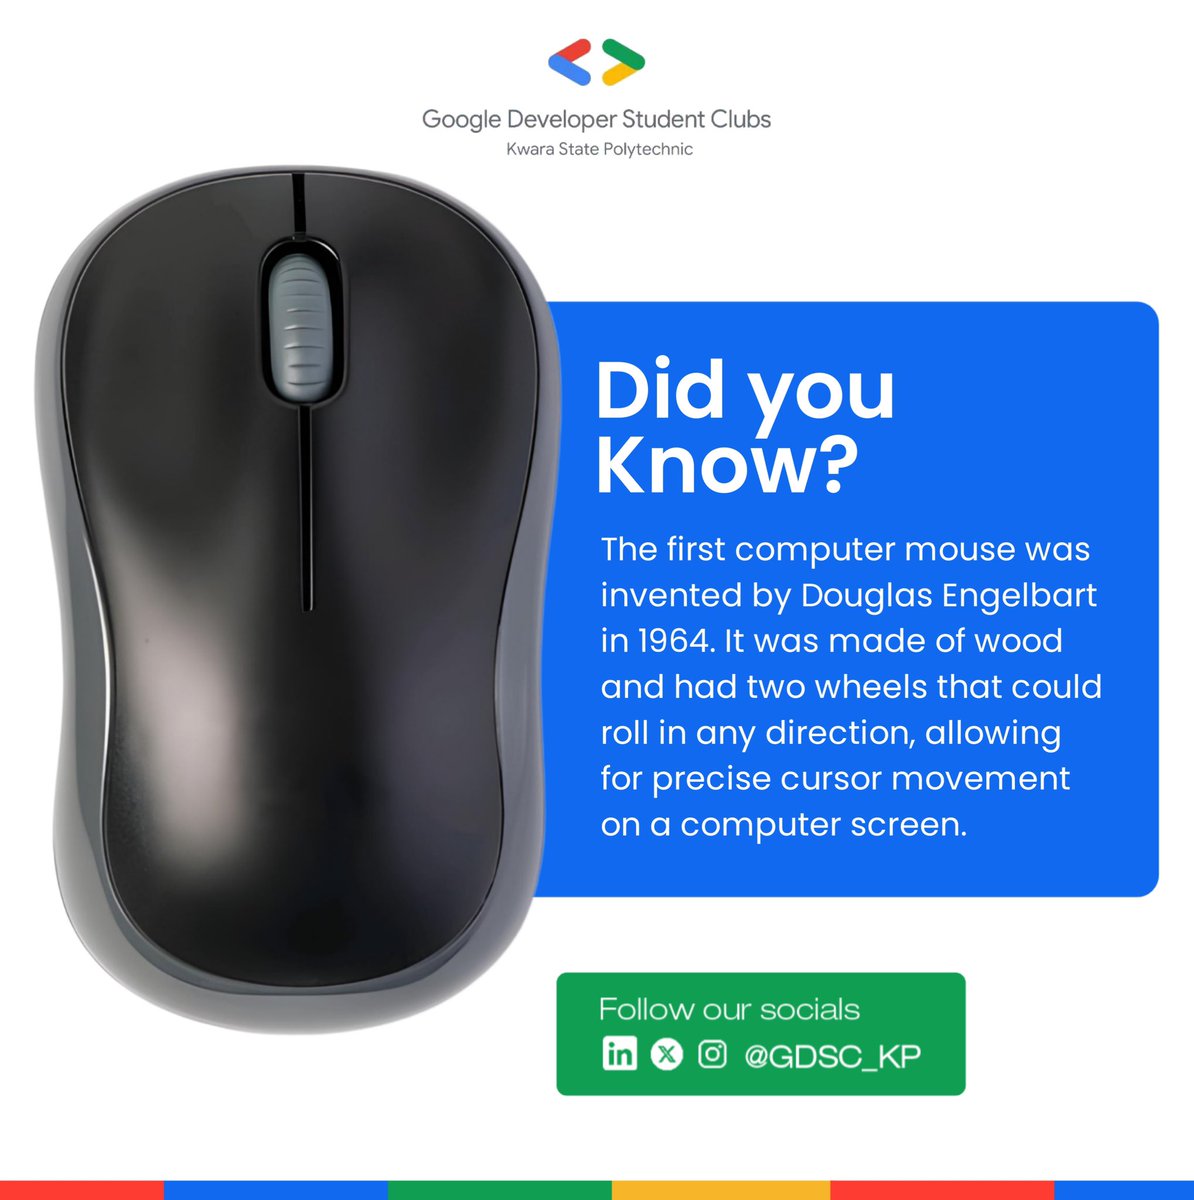 Did you know?

The first computer mouse was invented by Douglas Engelbart in 1964. It was made of wood and had two wheels that could roll in any direction, allowing for precise cursor movement on a computer screen.

#gdsckp #techfacts #gdsc